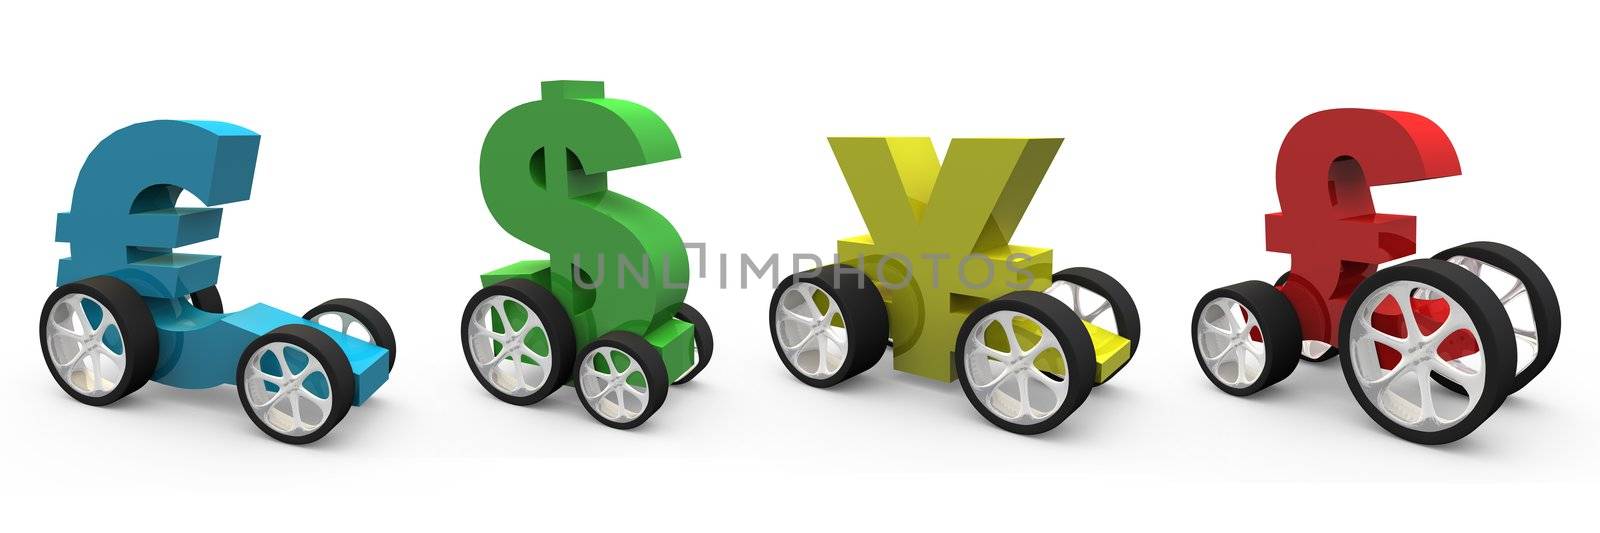 Currency Vehicles by 3pod